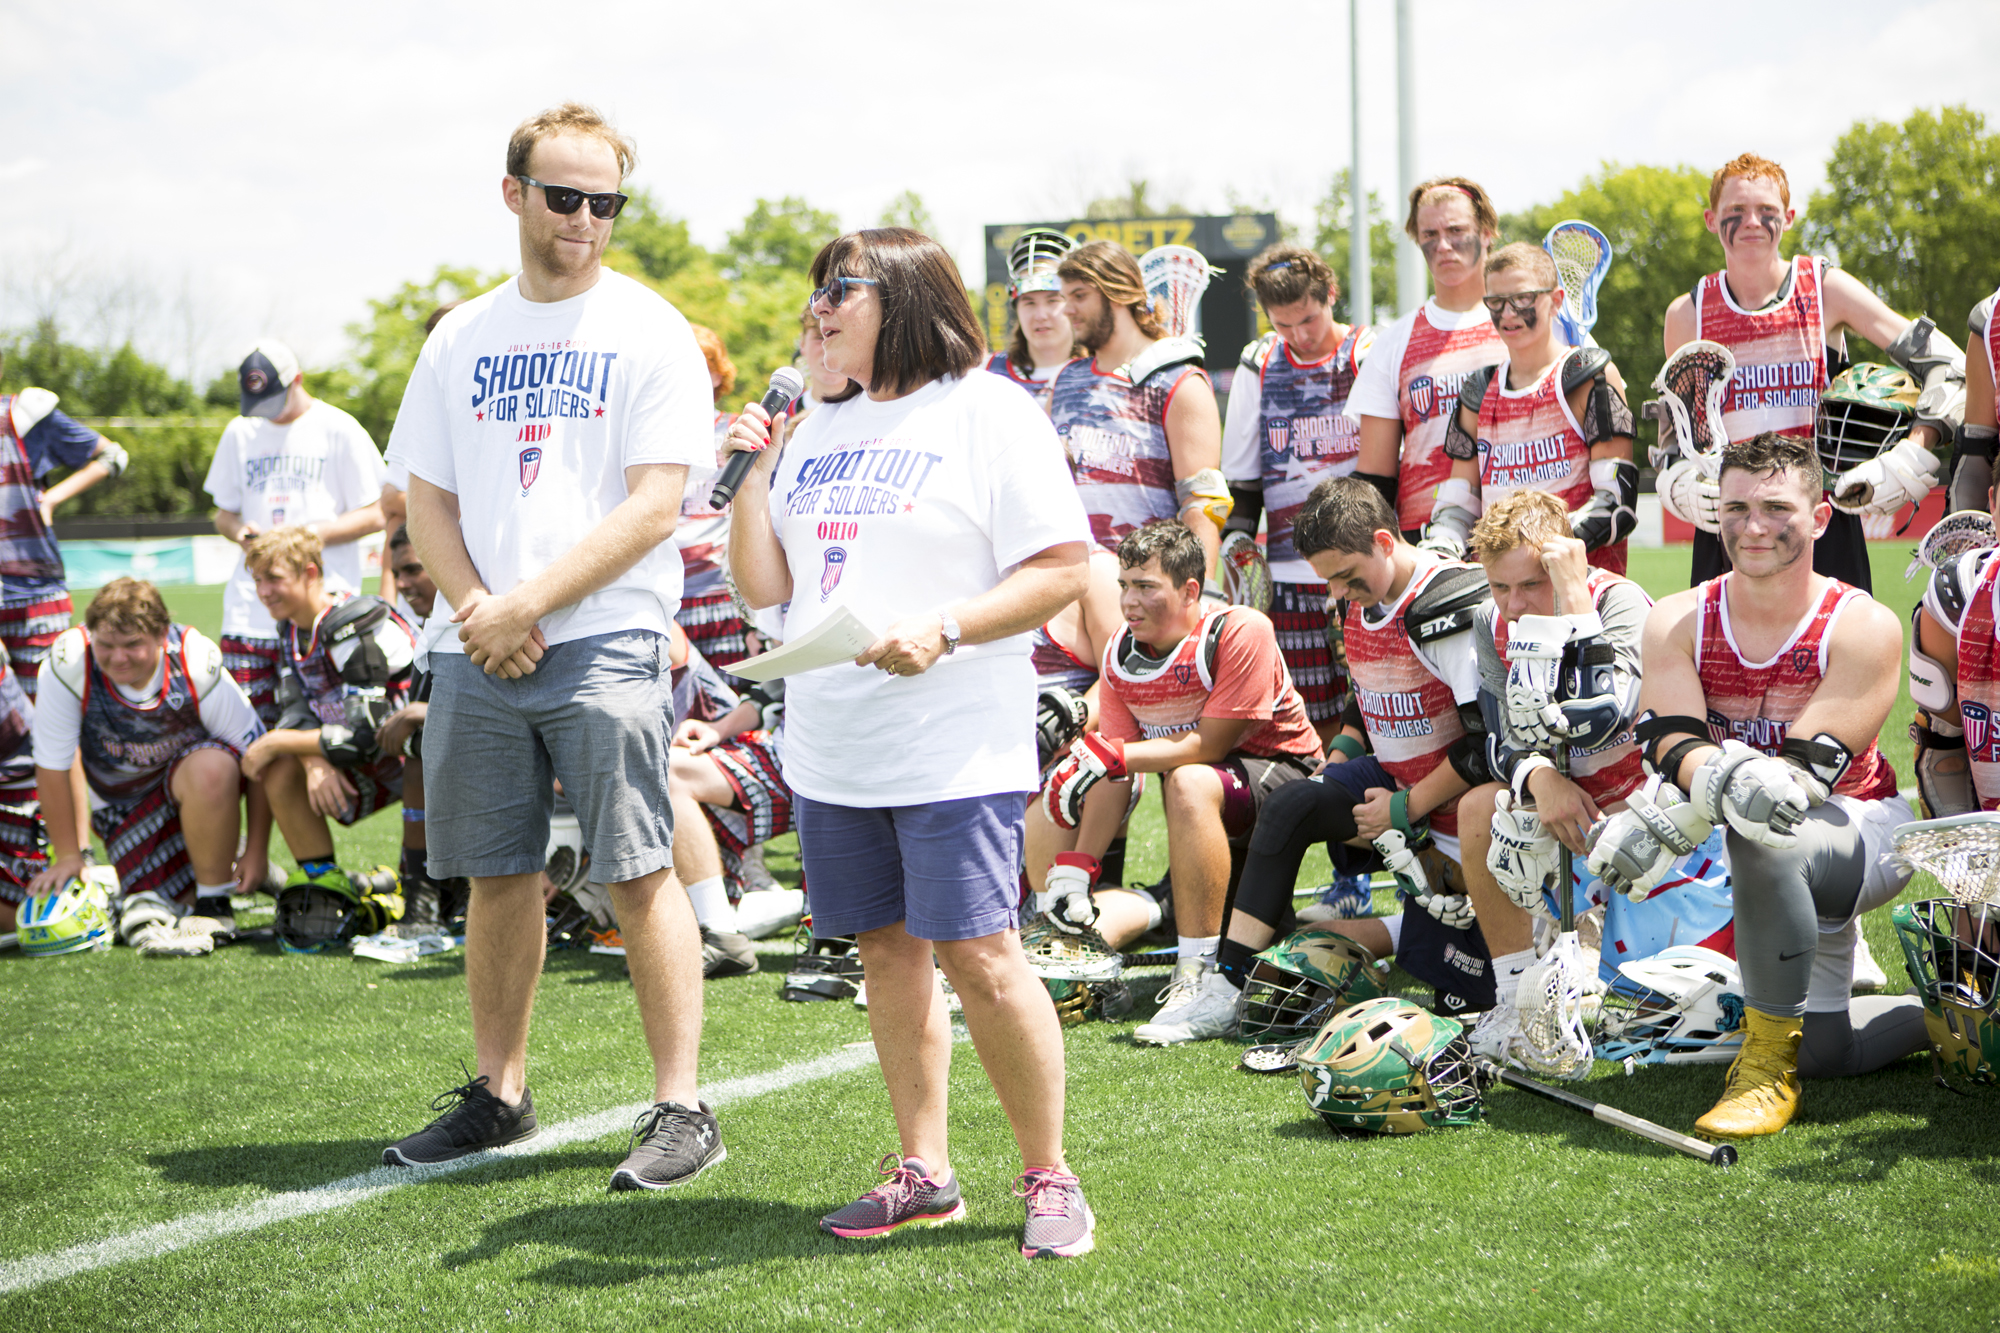 SHOOTOUT FOR SOLDIERS ANNOUNCES NEW EXECUTIVE DIRECTOR